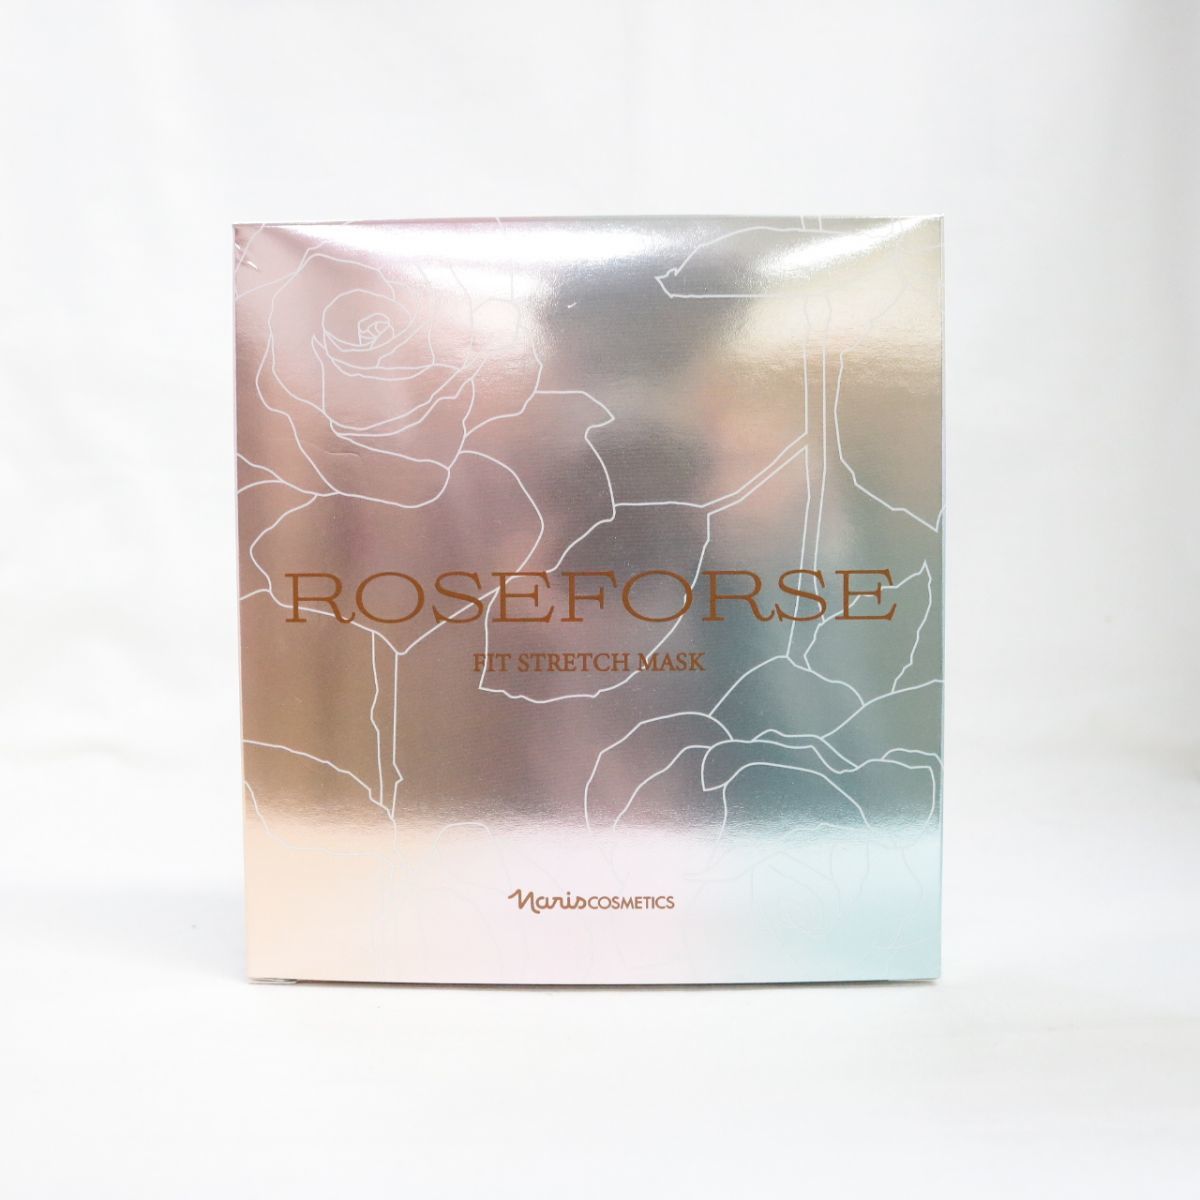 * new goods Naris cosmetics Naris rose force Fit stretch mask ( height moisturizer mask ) 26mL×6 set ( 0116-n1 )